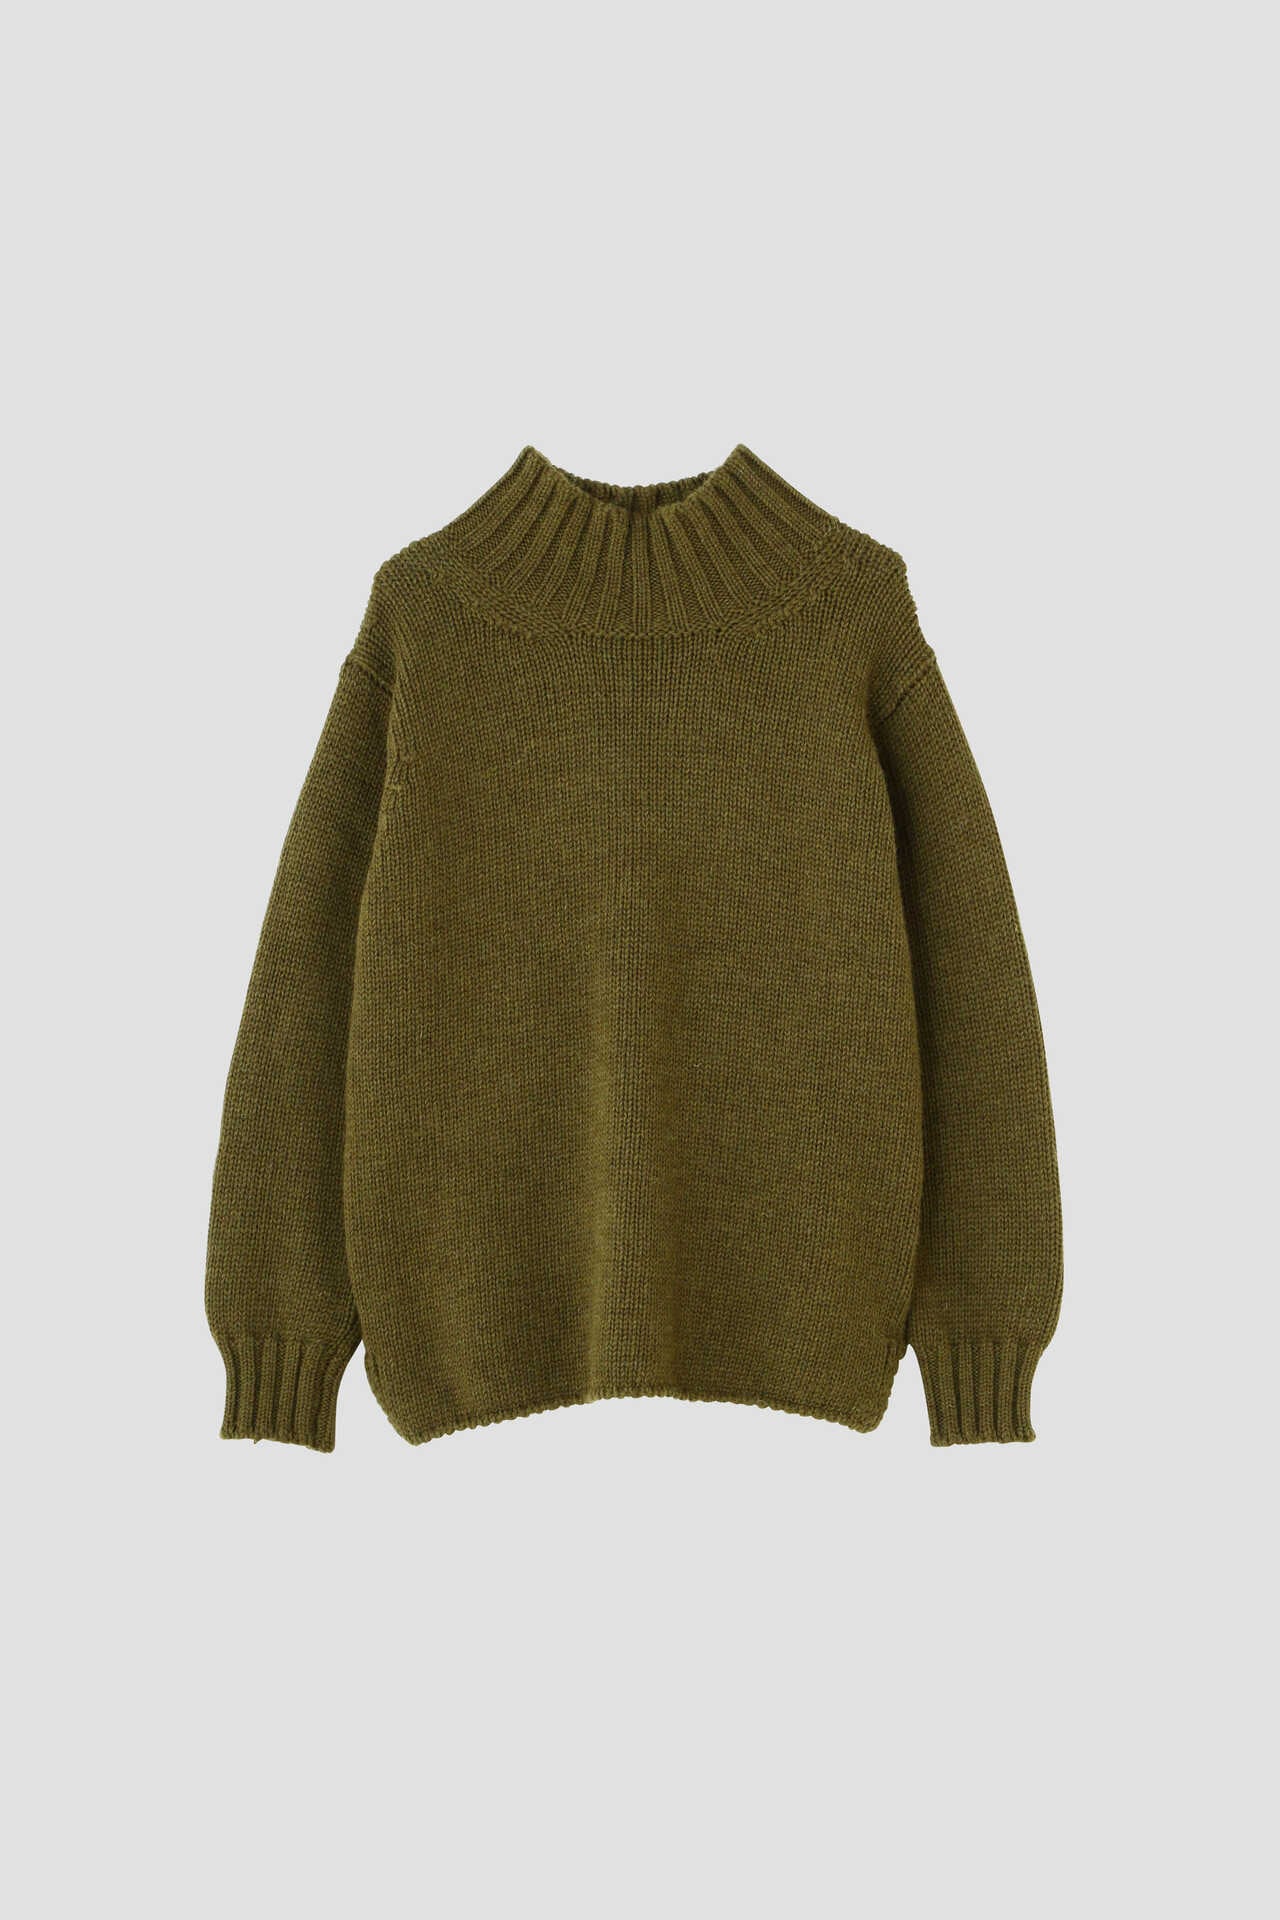 MHL pull over sweater